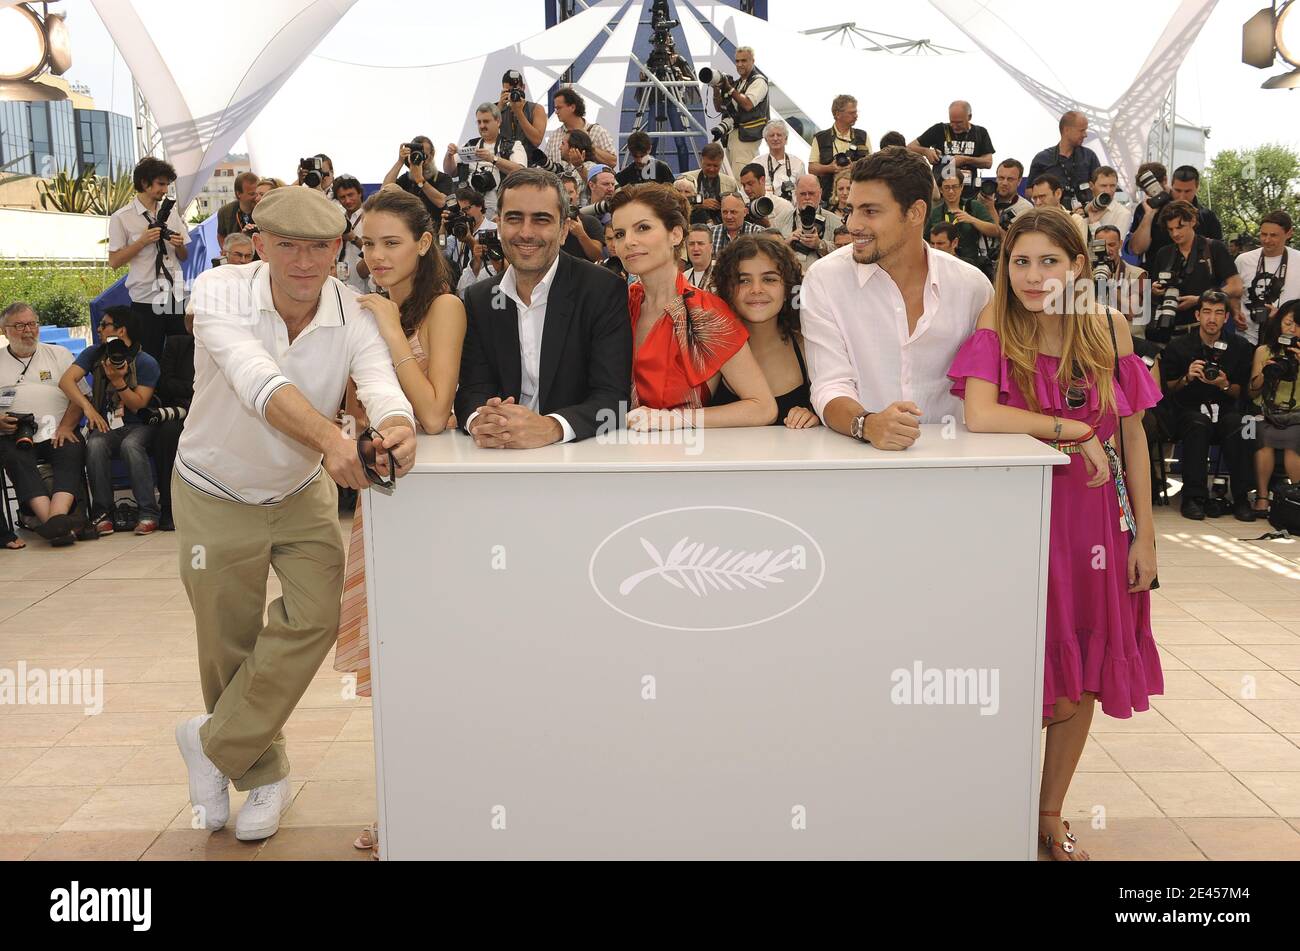 (L-R) Brazilian actors Nathalia Zemel, Caua Raymond, Josefina Schiler and Debora Bloch, Brazilian director Heitor Dhalia, Brazilian actress Laura Neiva and French actor Vincent Cassel attend the photocall for the film 'A Deriva', at the Palais des Festivals during 62nd International Cannes Film Festival in Cannes, France on May 21, 2009. Photo by Nebinger-Orban/ABACAPRESS.COM Stock Photo